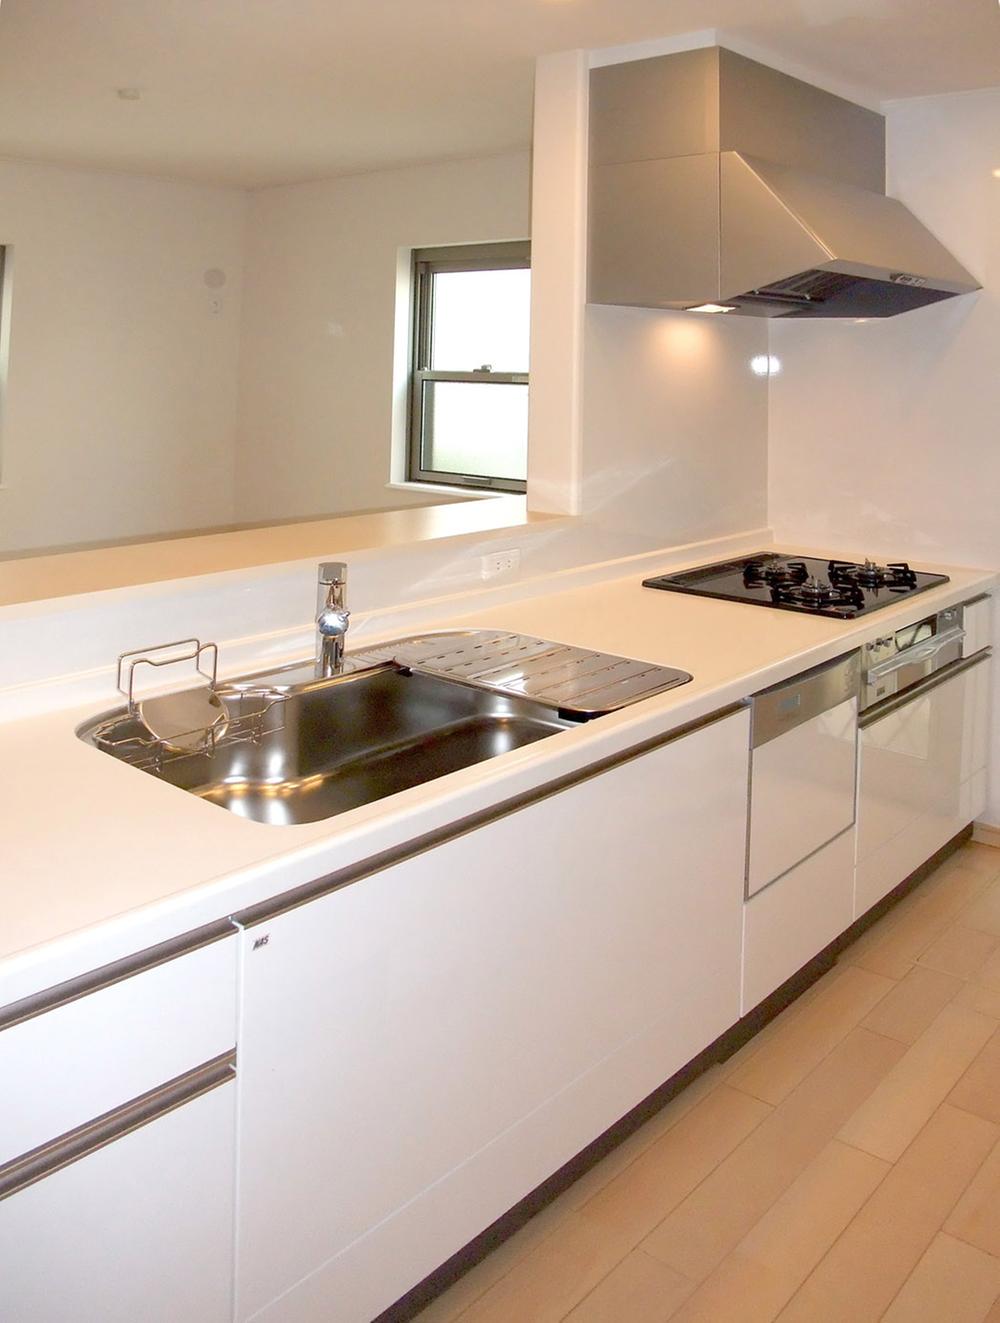 Other Equipment. Underfloor Storage, pantry, Set up a cupboard. Storage space around the water are many easy-to-use kitchen. Dishwasher, of course, Items to life more comfortable is the standard specification. It will produce a comfortable kitchen per floor heating also in the kitchen.